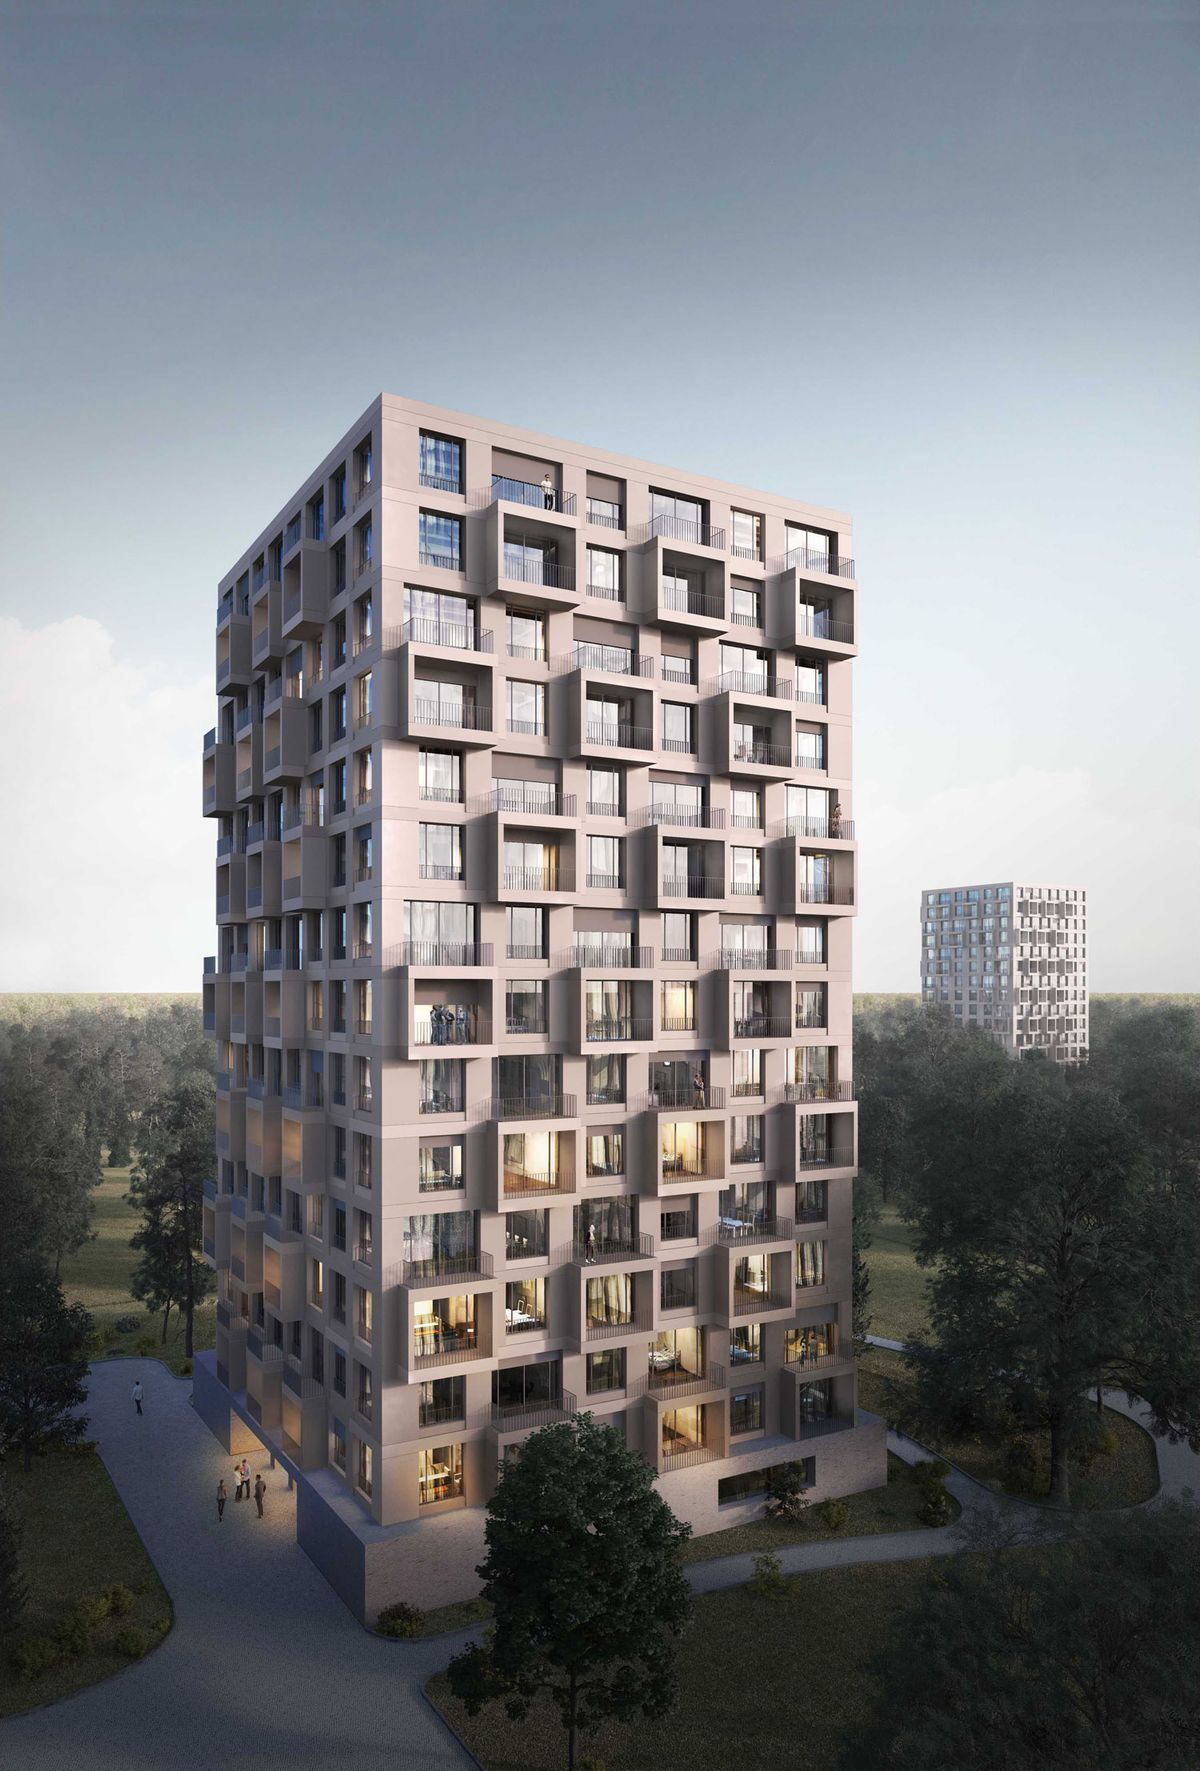 Upcoming projects - Cree by Rhomberg | The Natural Change in Urban ...